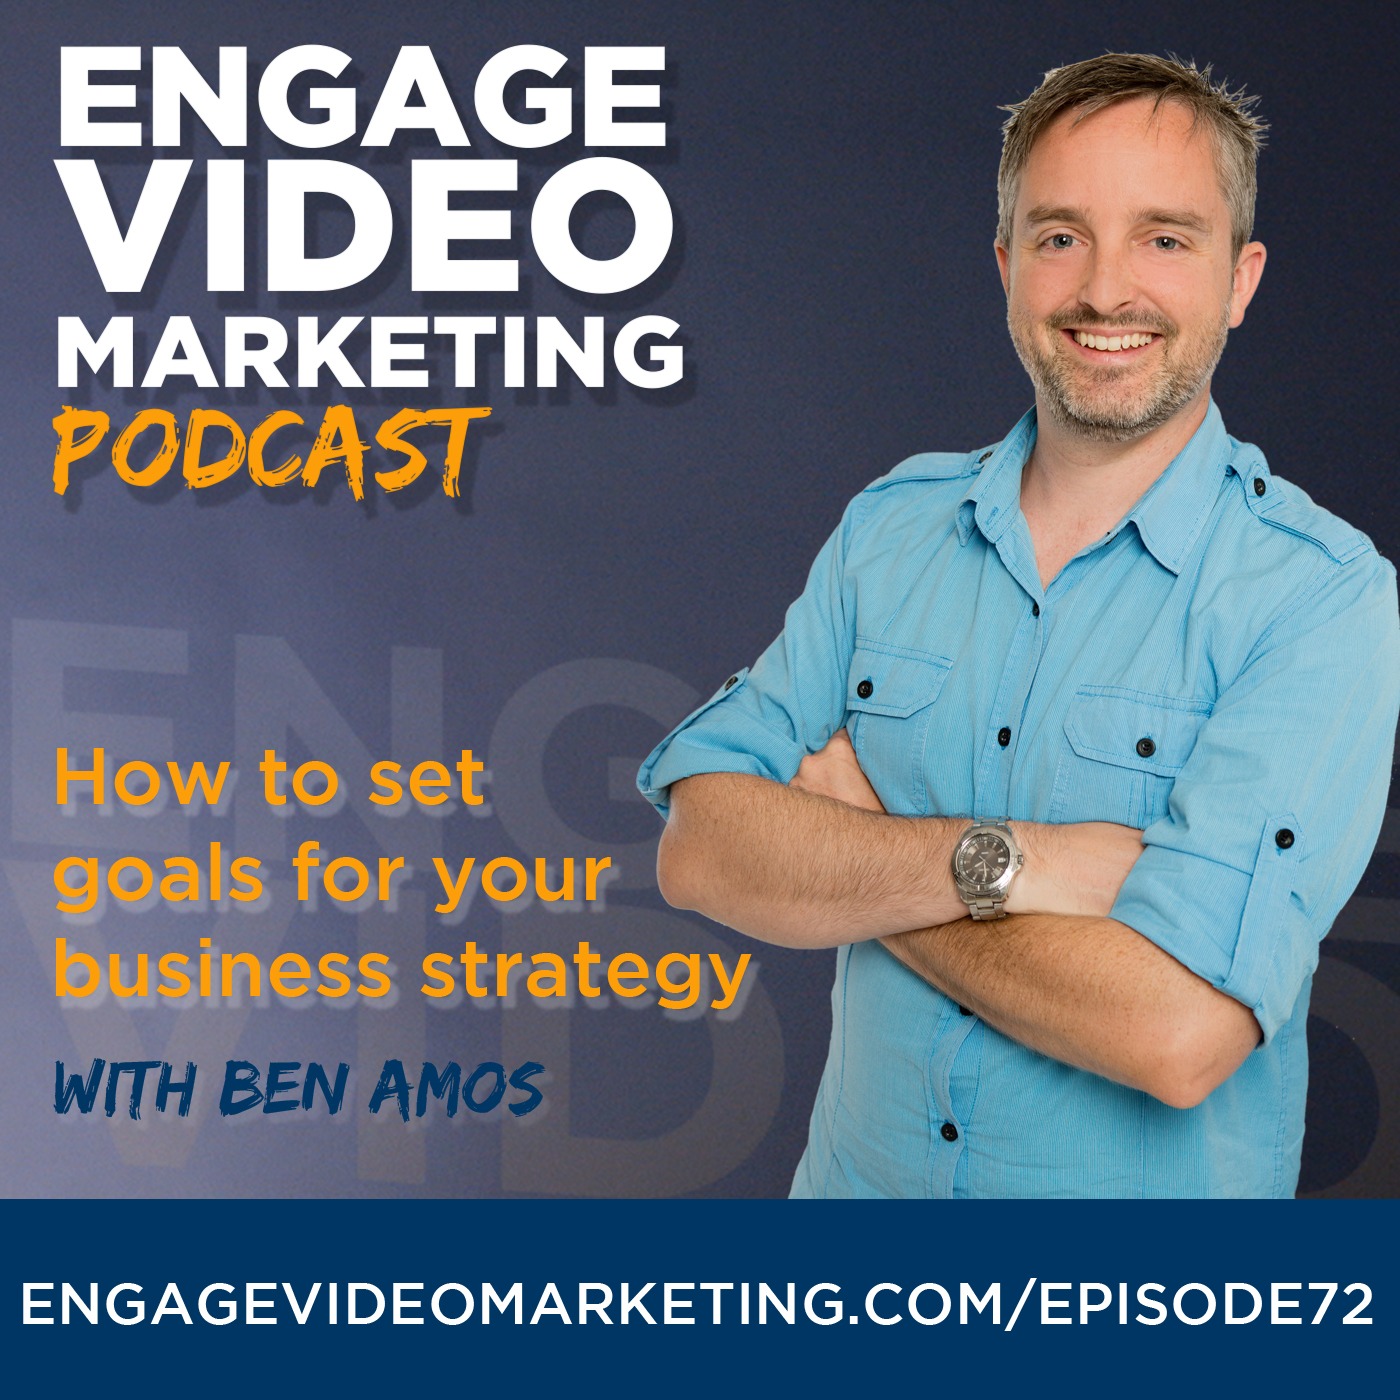 How to set goals for your video marketing strategy